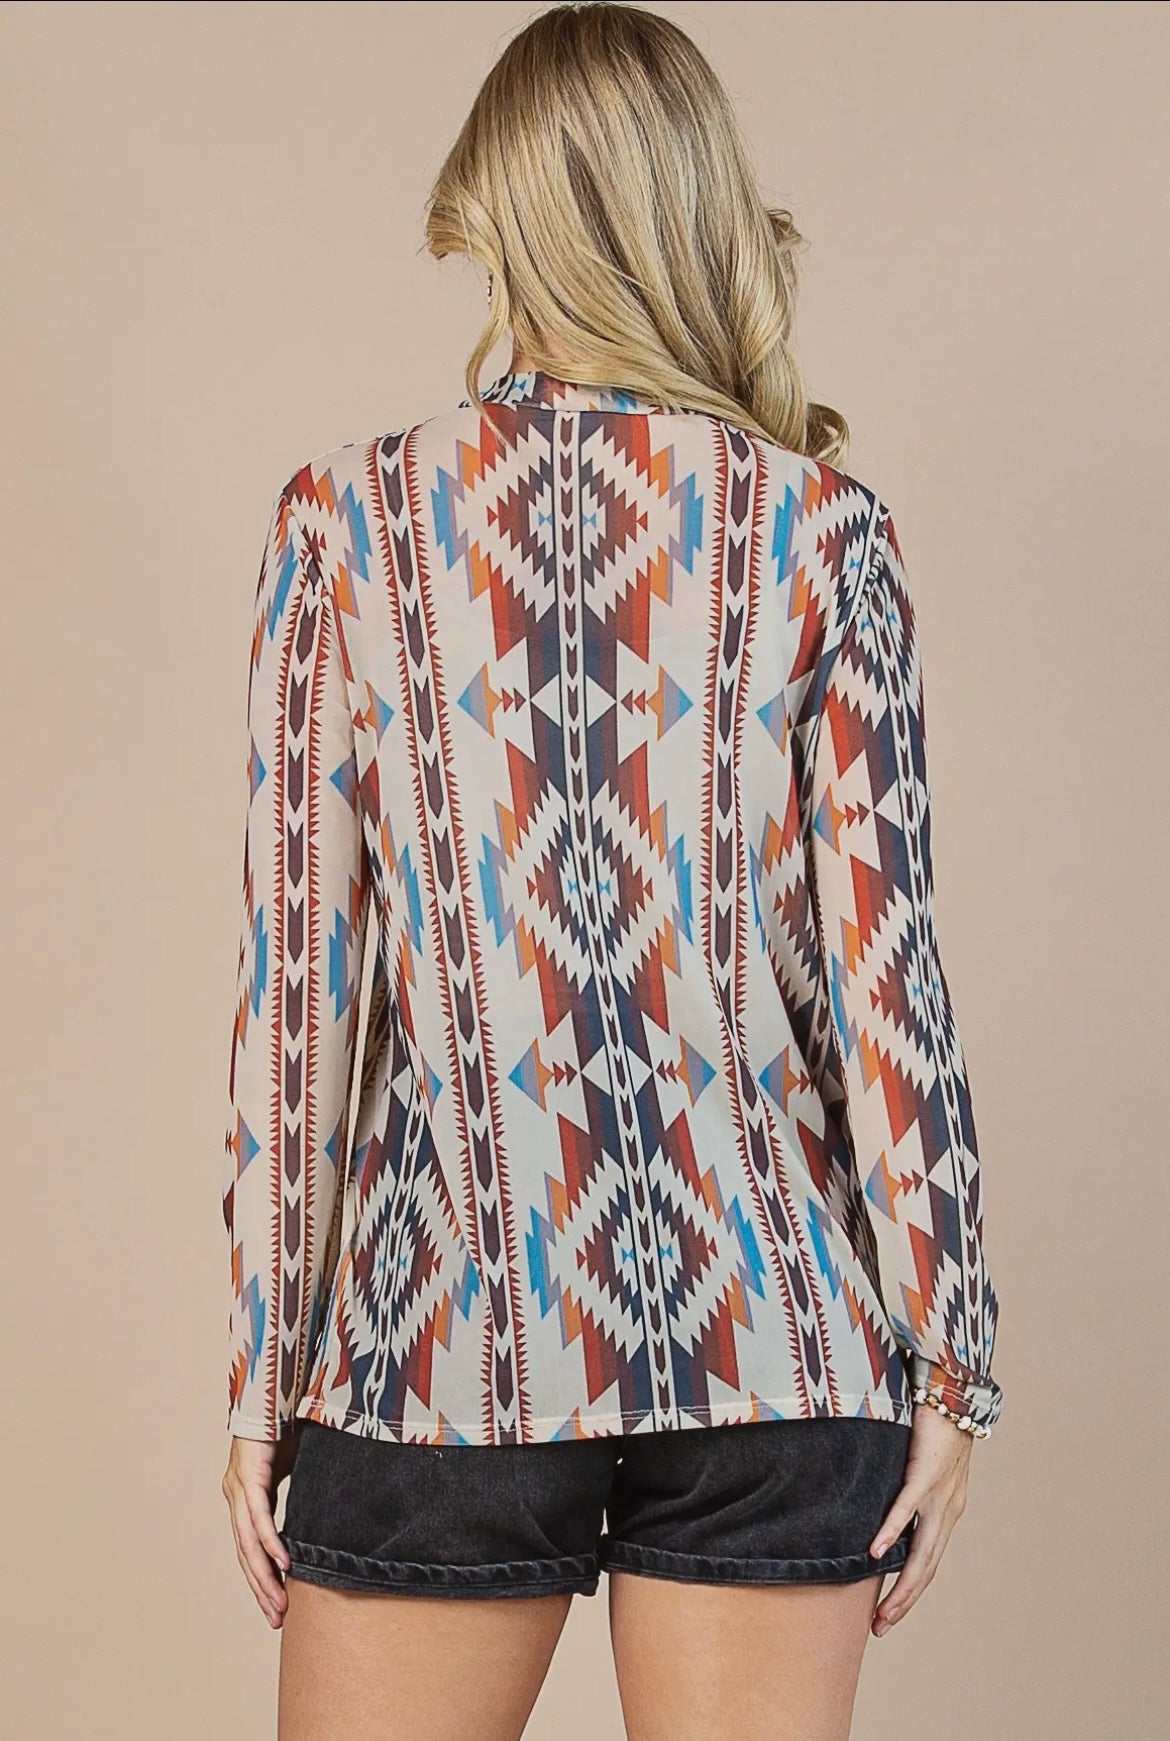 Out West Aztec Mesh Long Sleeve